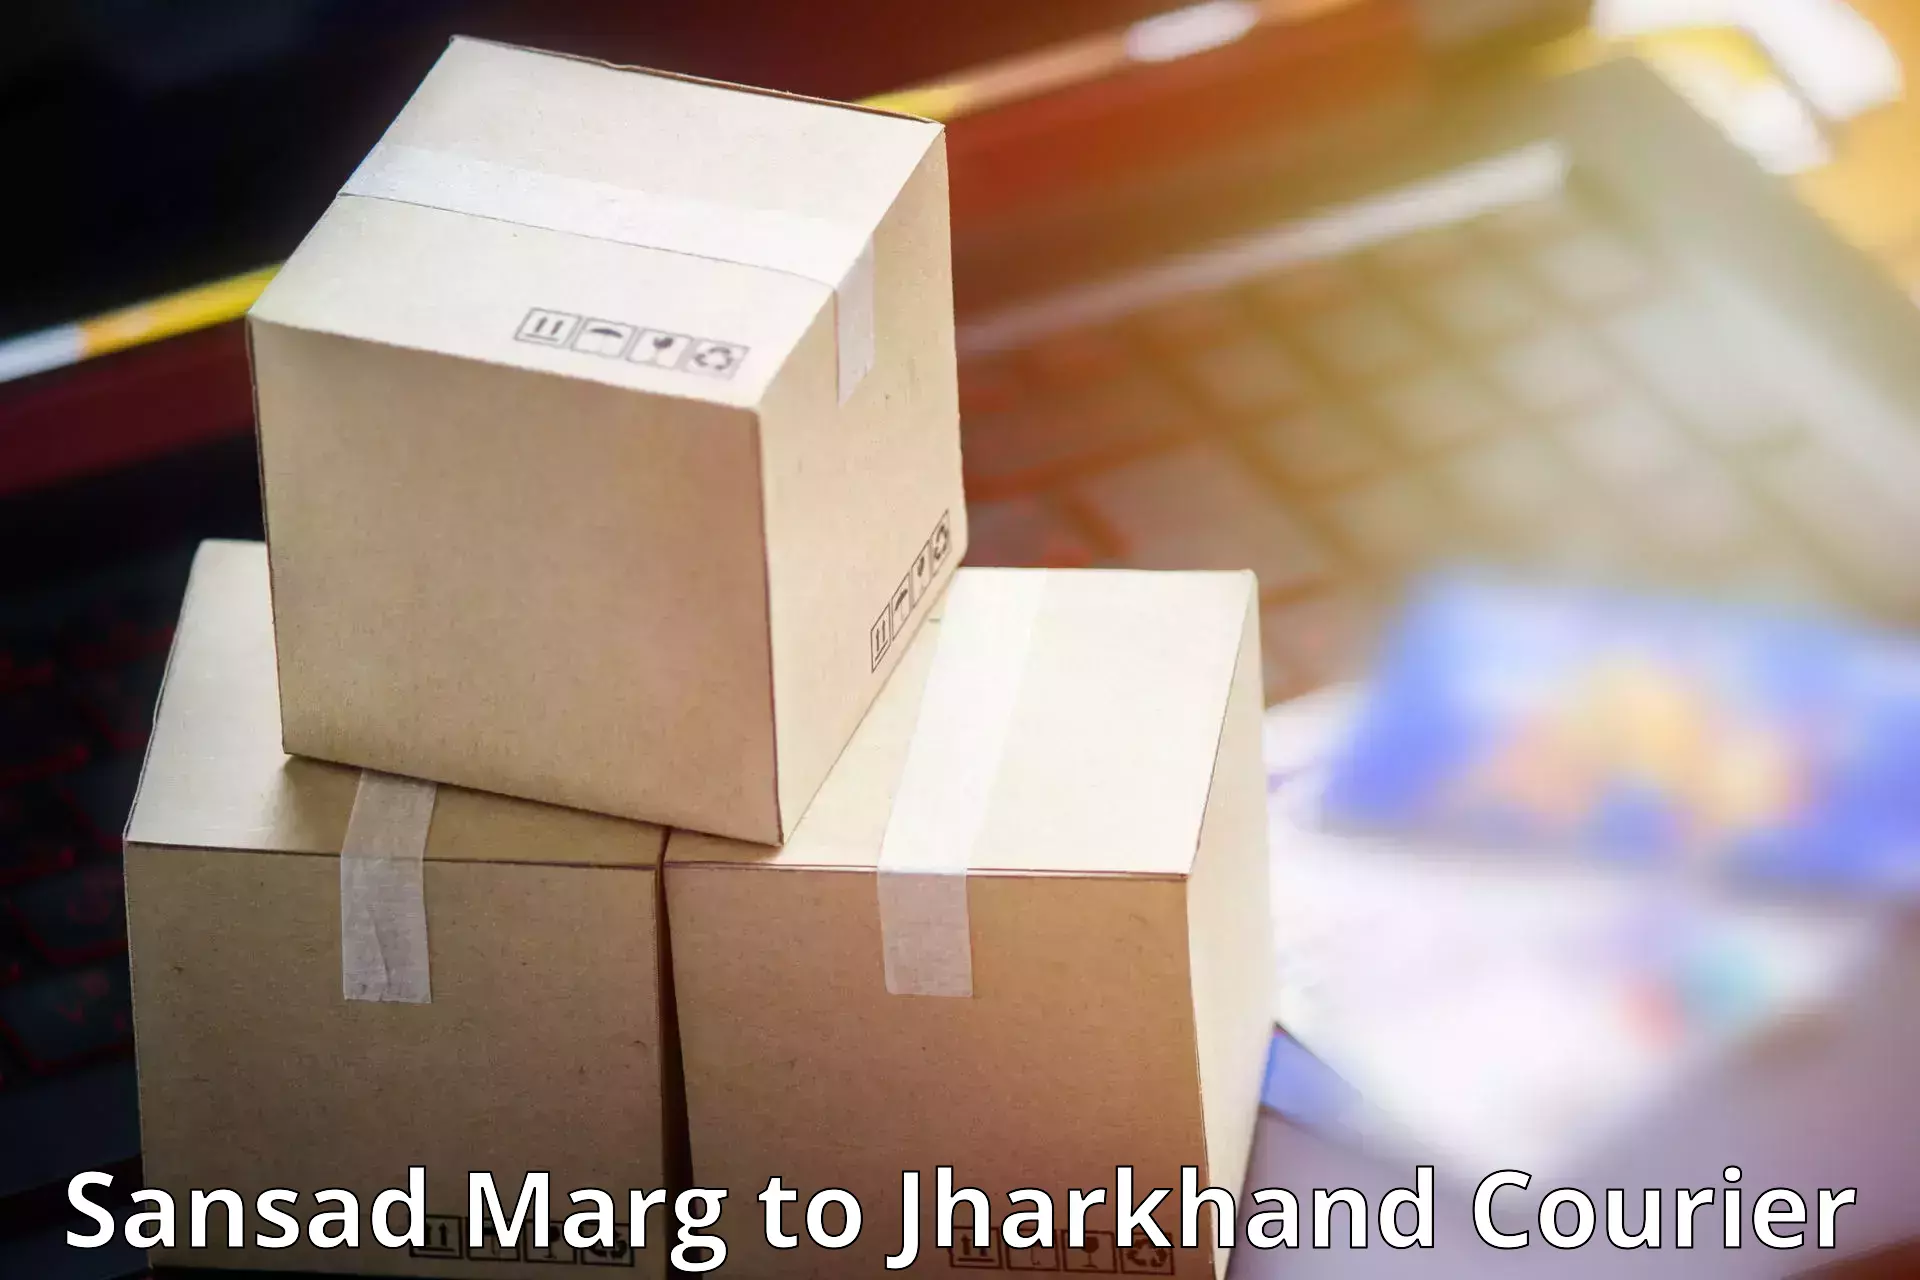 Quality courier services Sansad Marg to Jharkhand